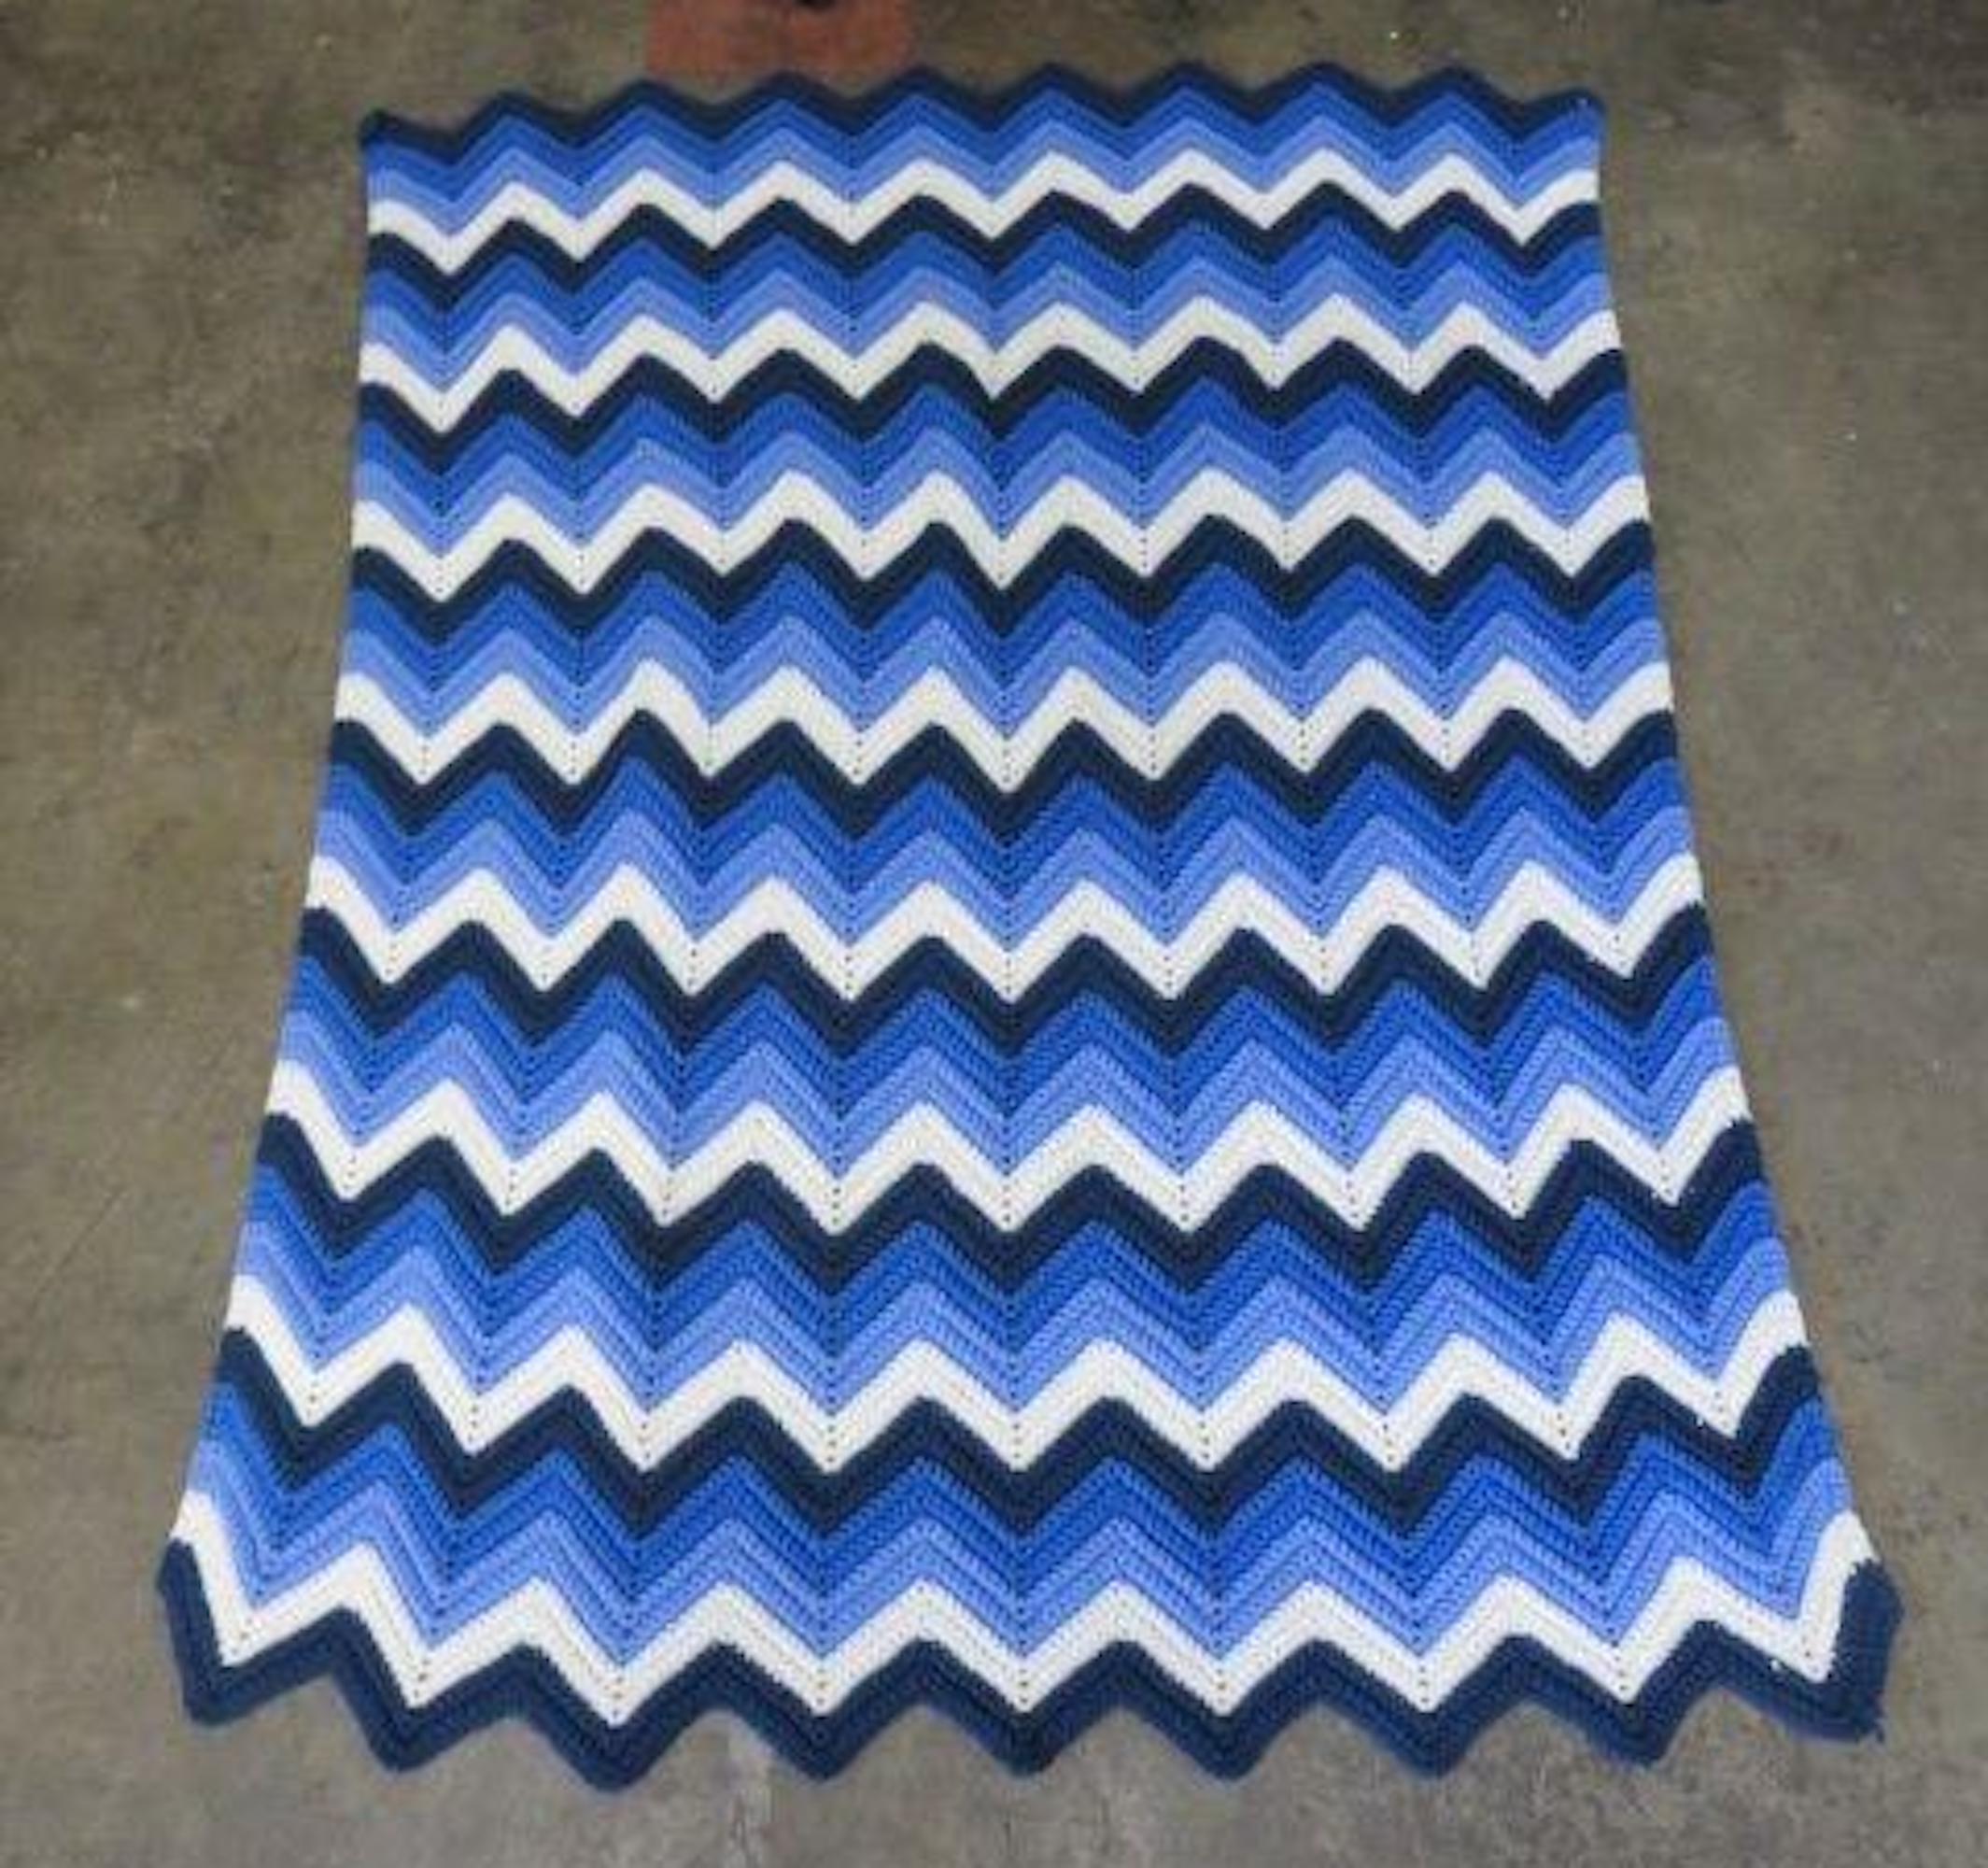 1978 Hand-Knit Shades of Blue and White Afghan Throw (40” X 52”)